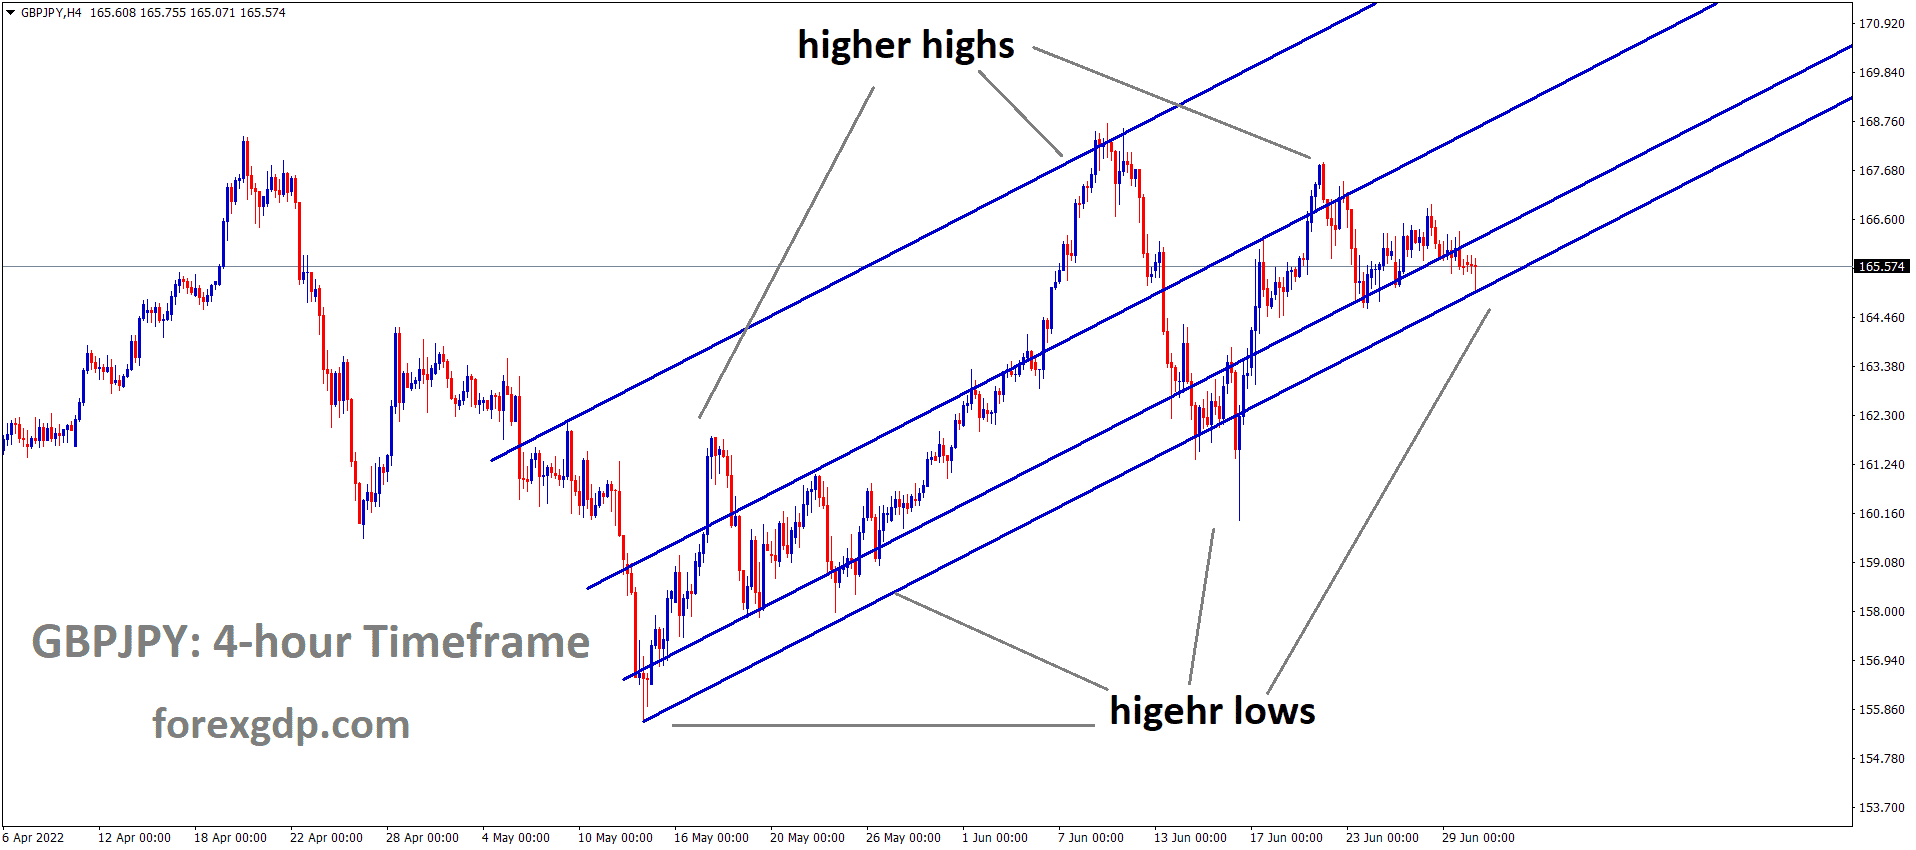 GBPJPY H4 Time Frame Analysis Market is moving in an Ascending channel and the Market has reached the higher low area of the channel